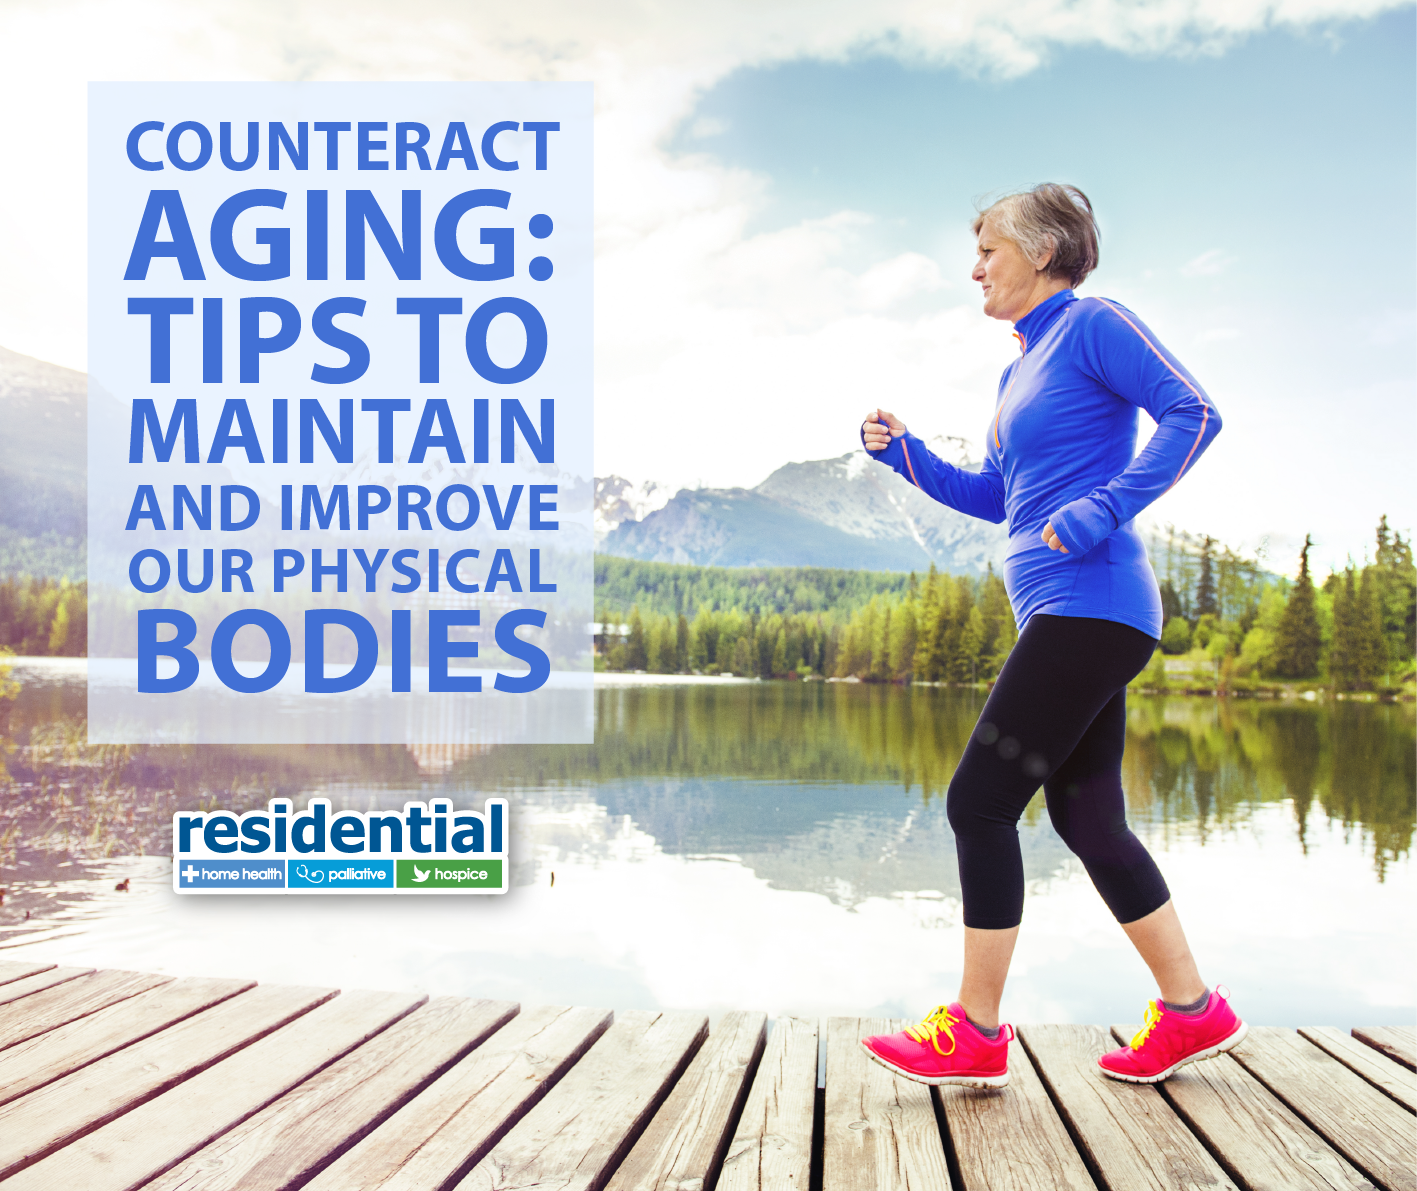 Counteract Aging